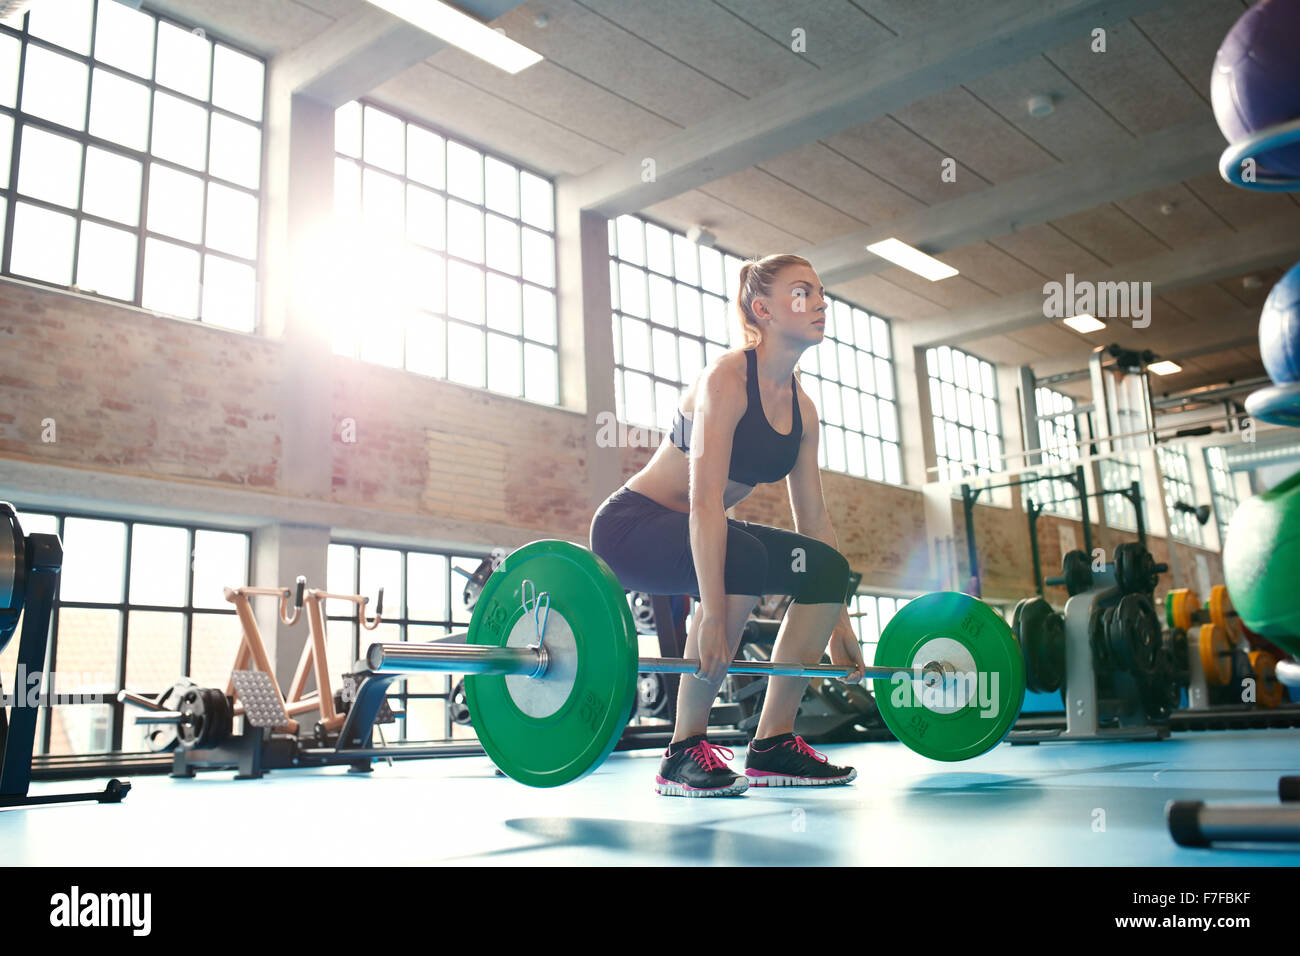 Young woman working hard in the gym. Fit female athlete lifting weights in health club. Stock Photo